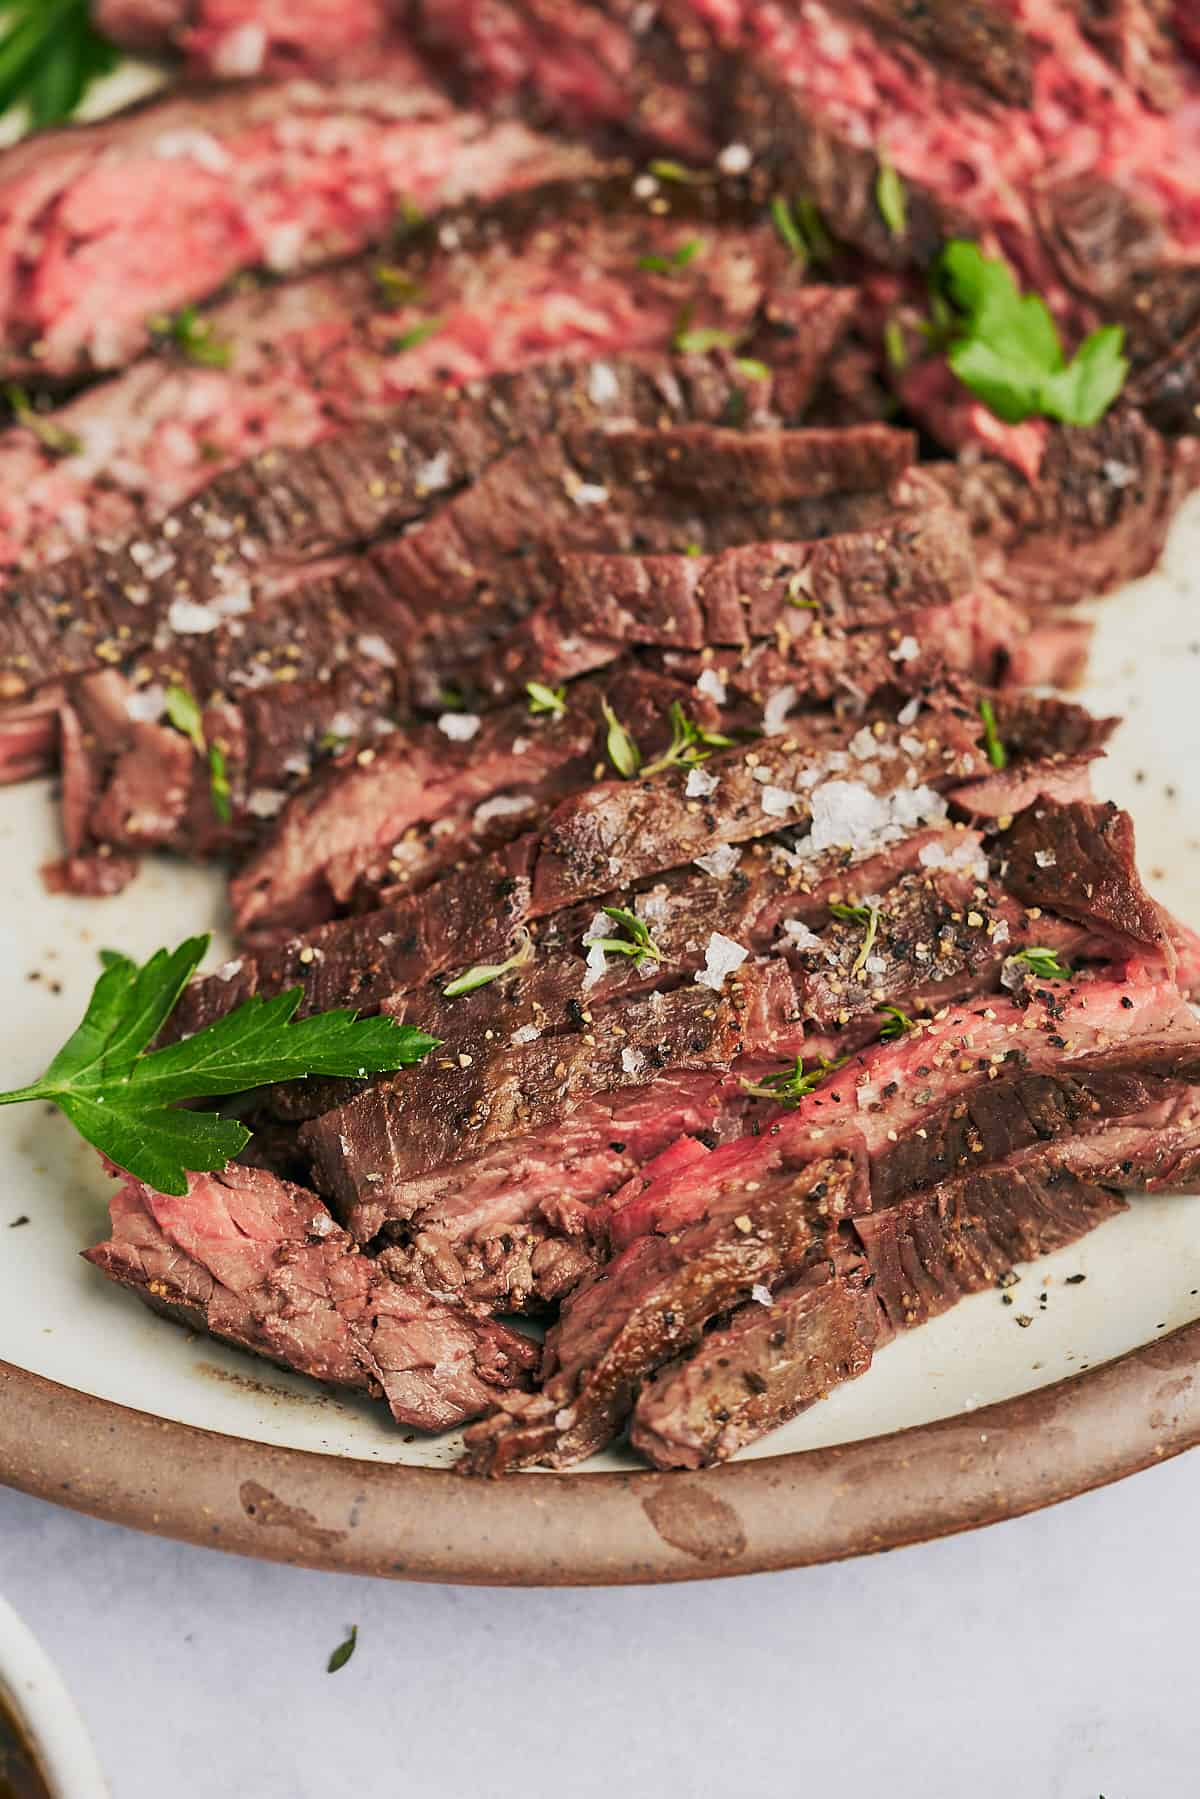 Delicious bavette steak seasoned with parsley, thyme, pepper, and sea salt on a ceramic speckled plate with a brown rim.